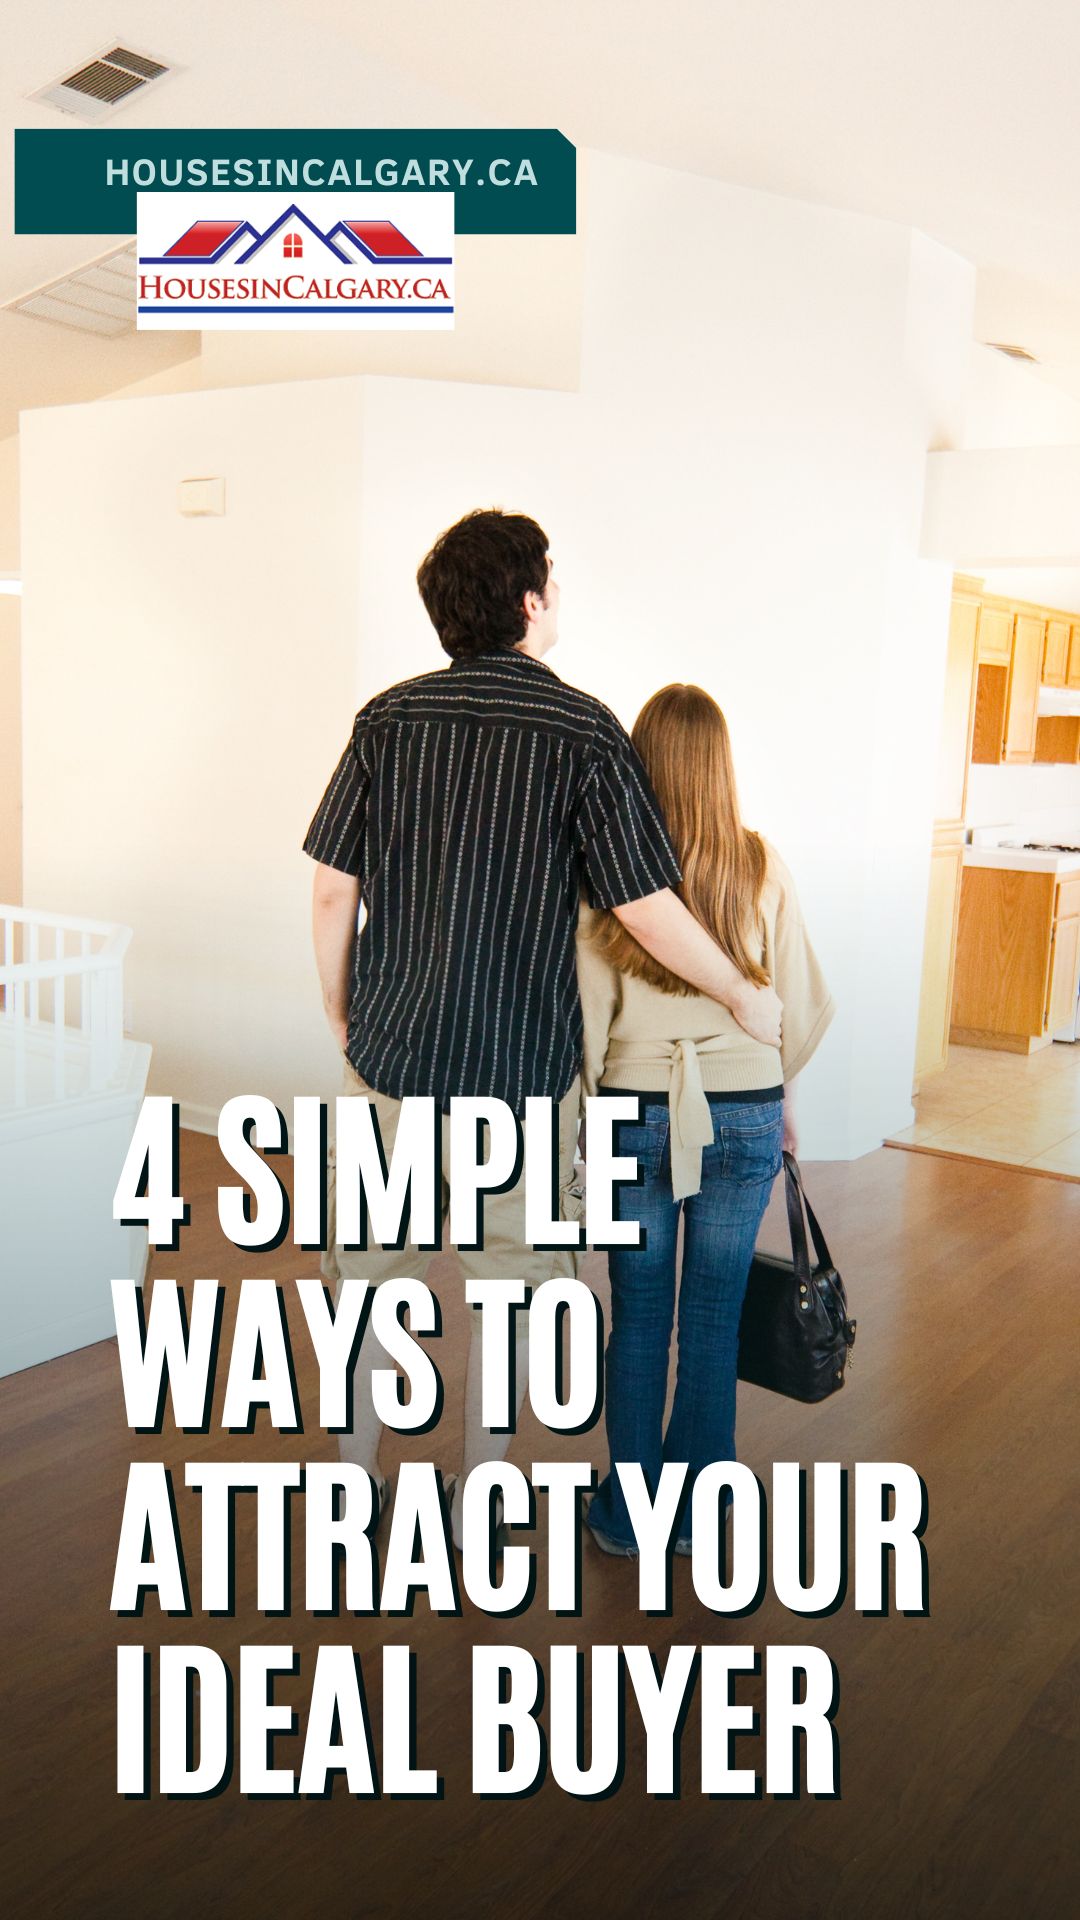 4 Simple Ways to Attract Your Ideal Buyer